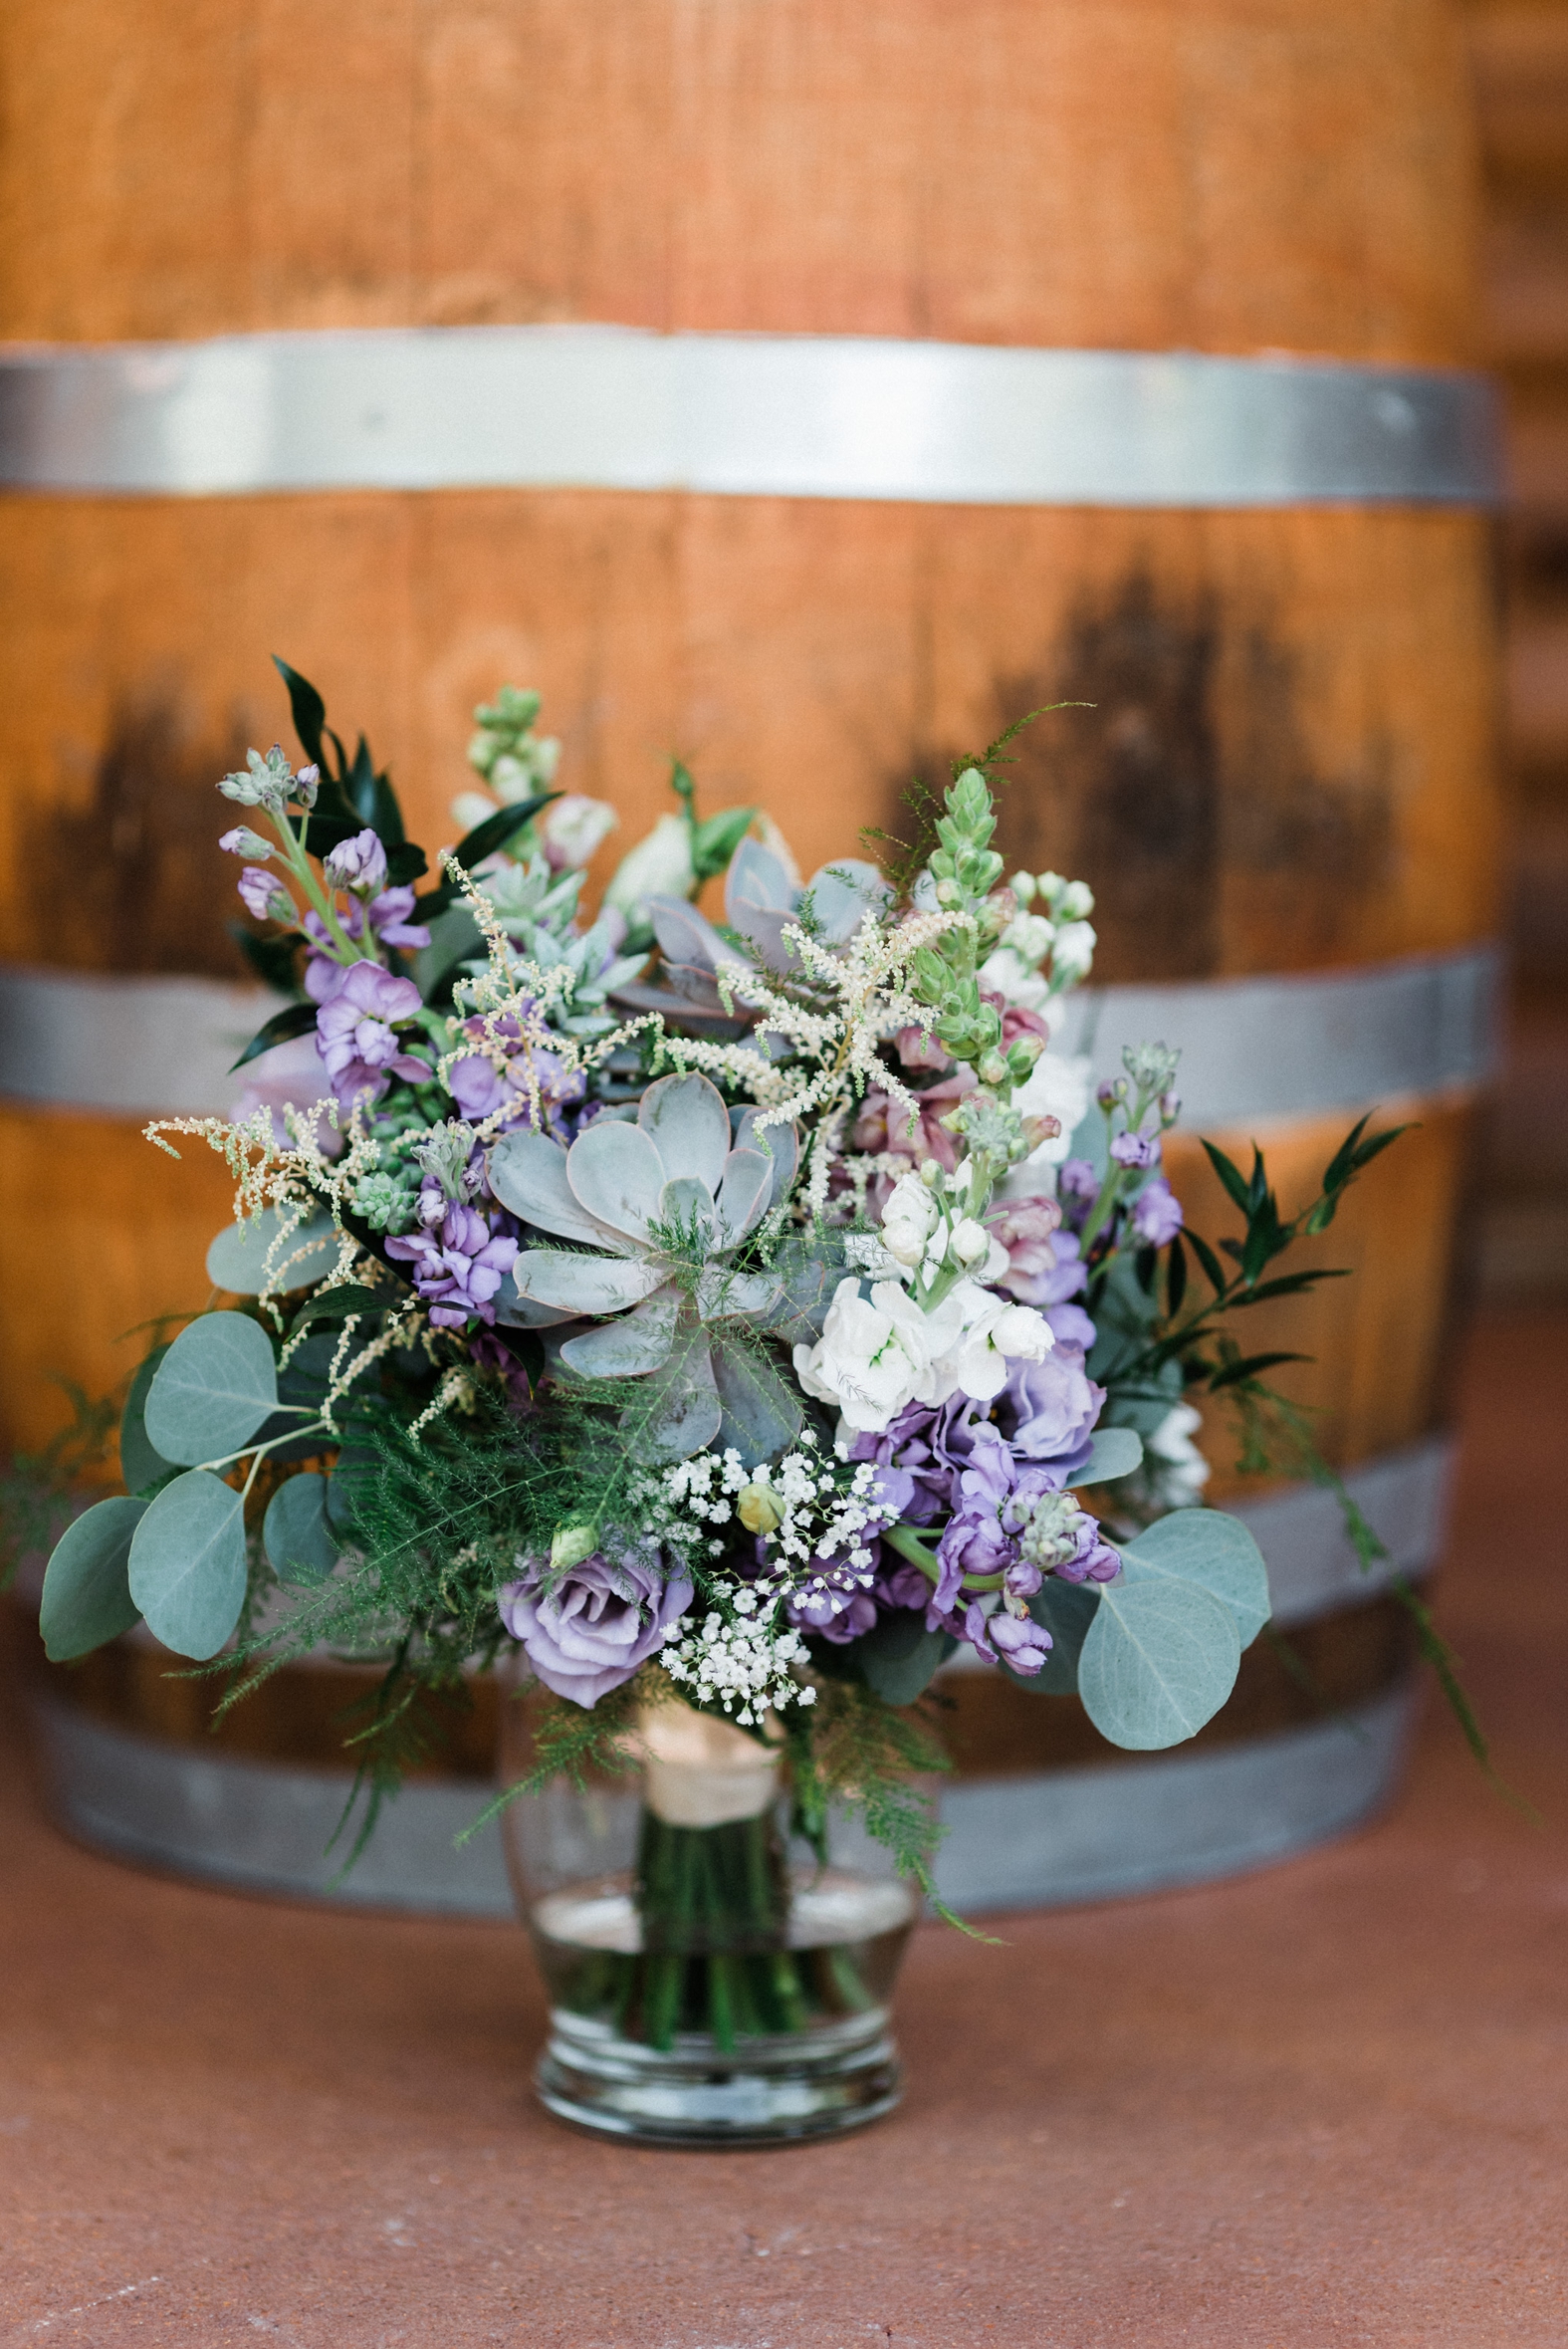 Purple, white, and lavender bridal bouquet with succulents, silver dollar eucalyptus, and greenery; wedding flowers